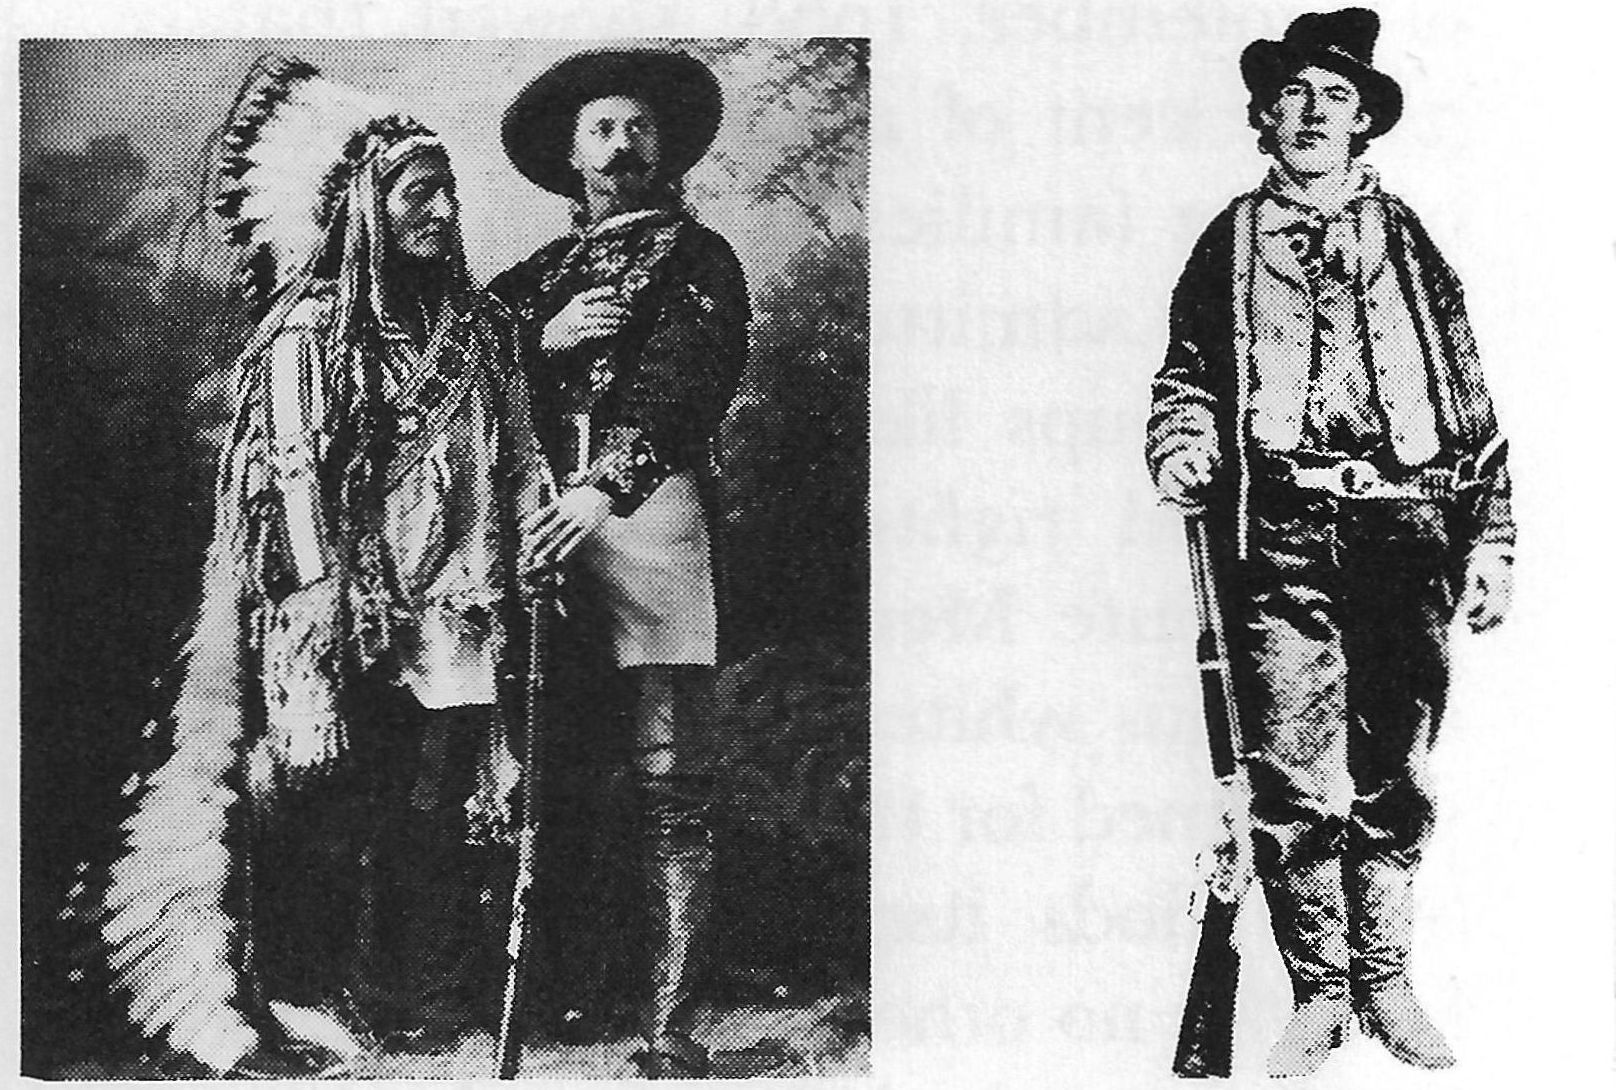 11 Sitting Bull and Buffalo Bill, Billy the Kid. The Jesse James gang, and another notorious outlaw, Belle Starr.